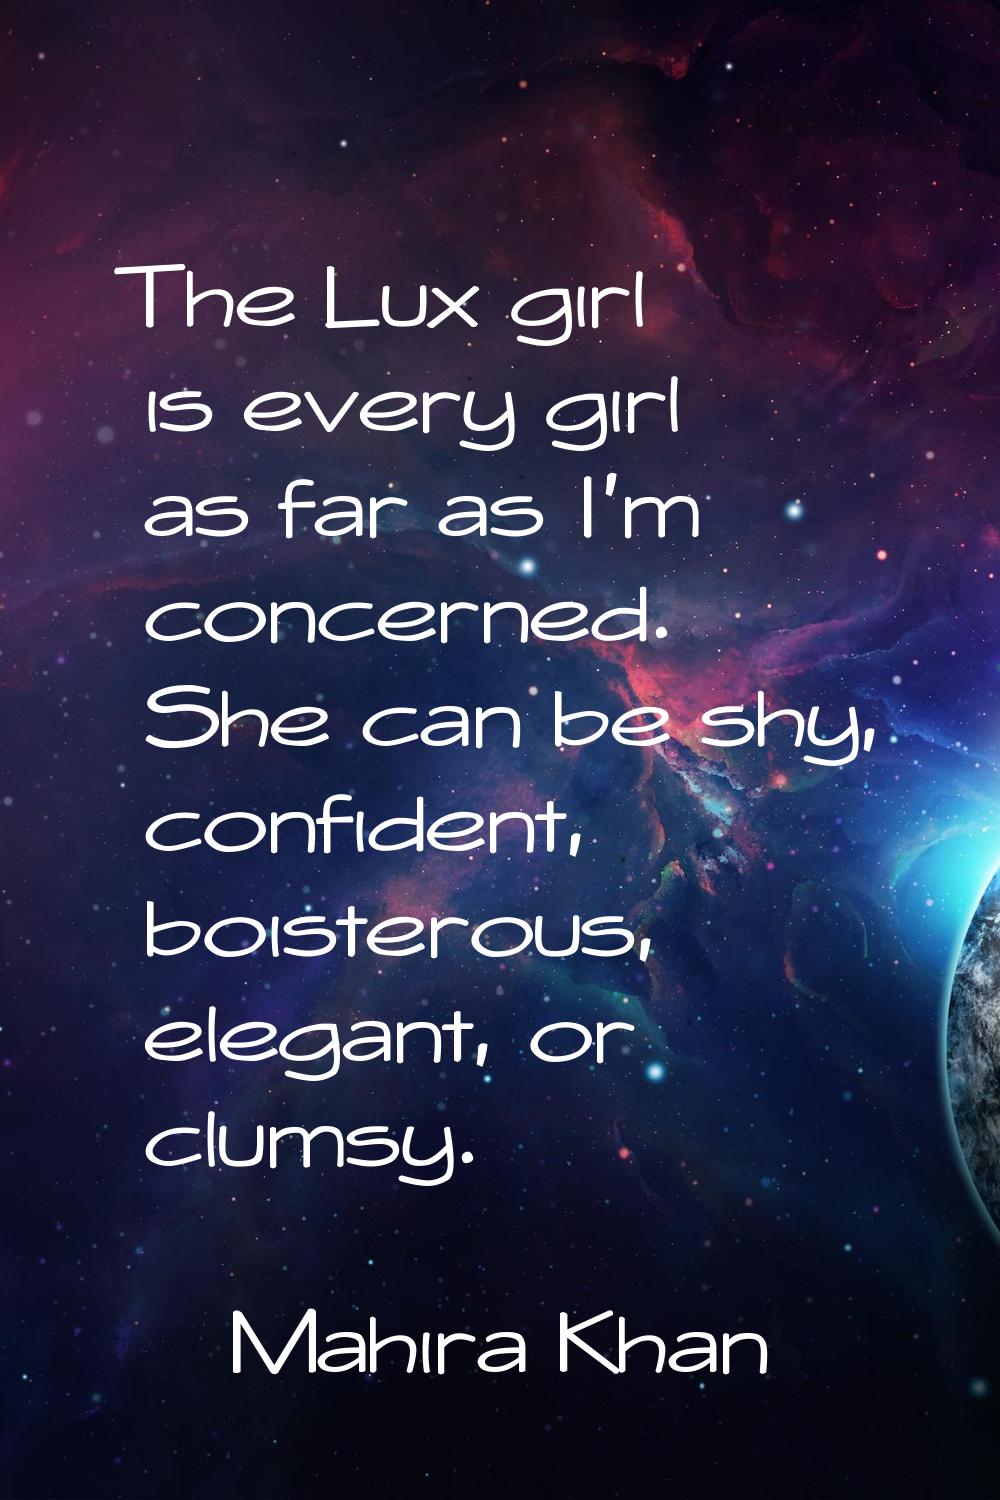 The Lux girl is every girl as far as I'm concerned. She can be shy, confident, boisterous, elegant,